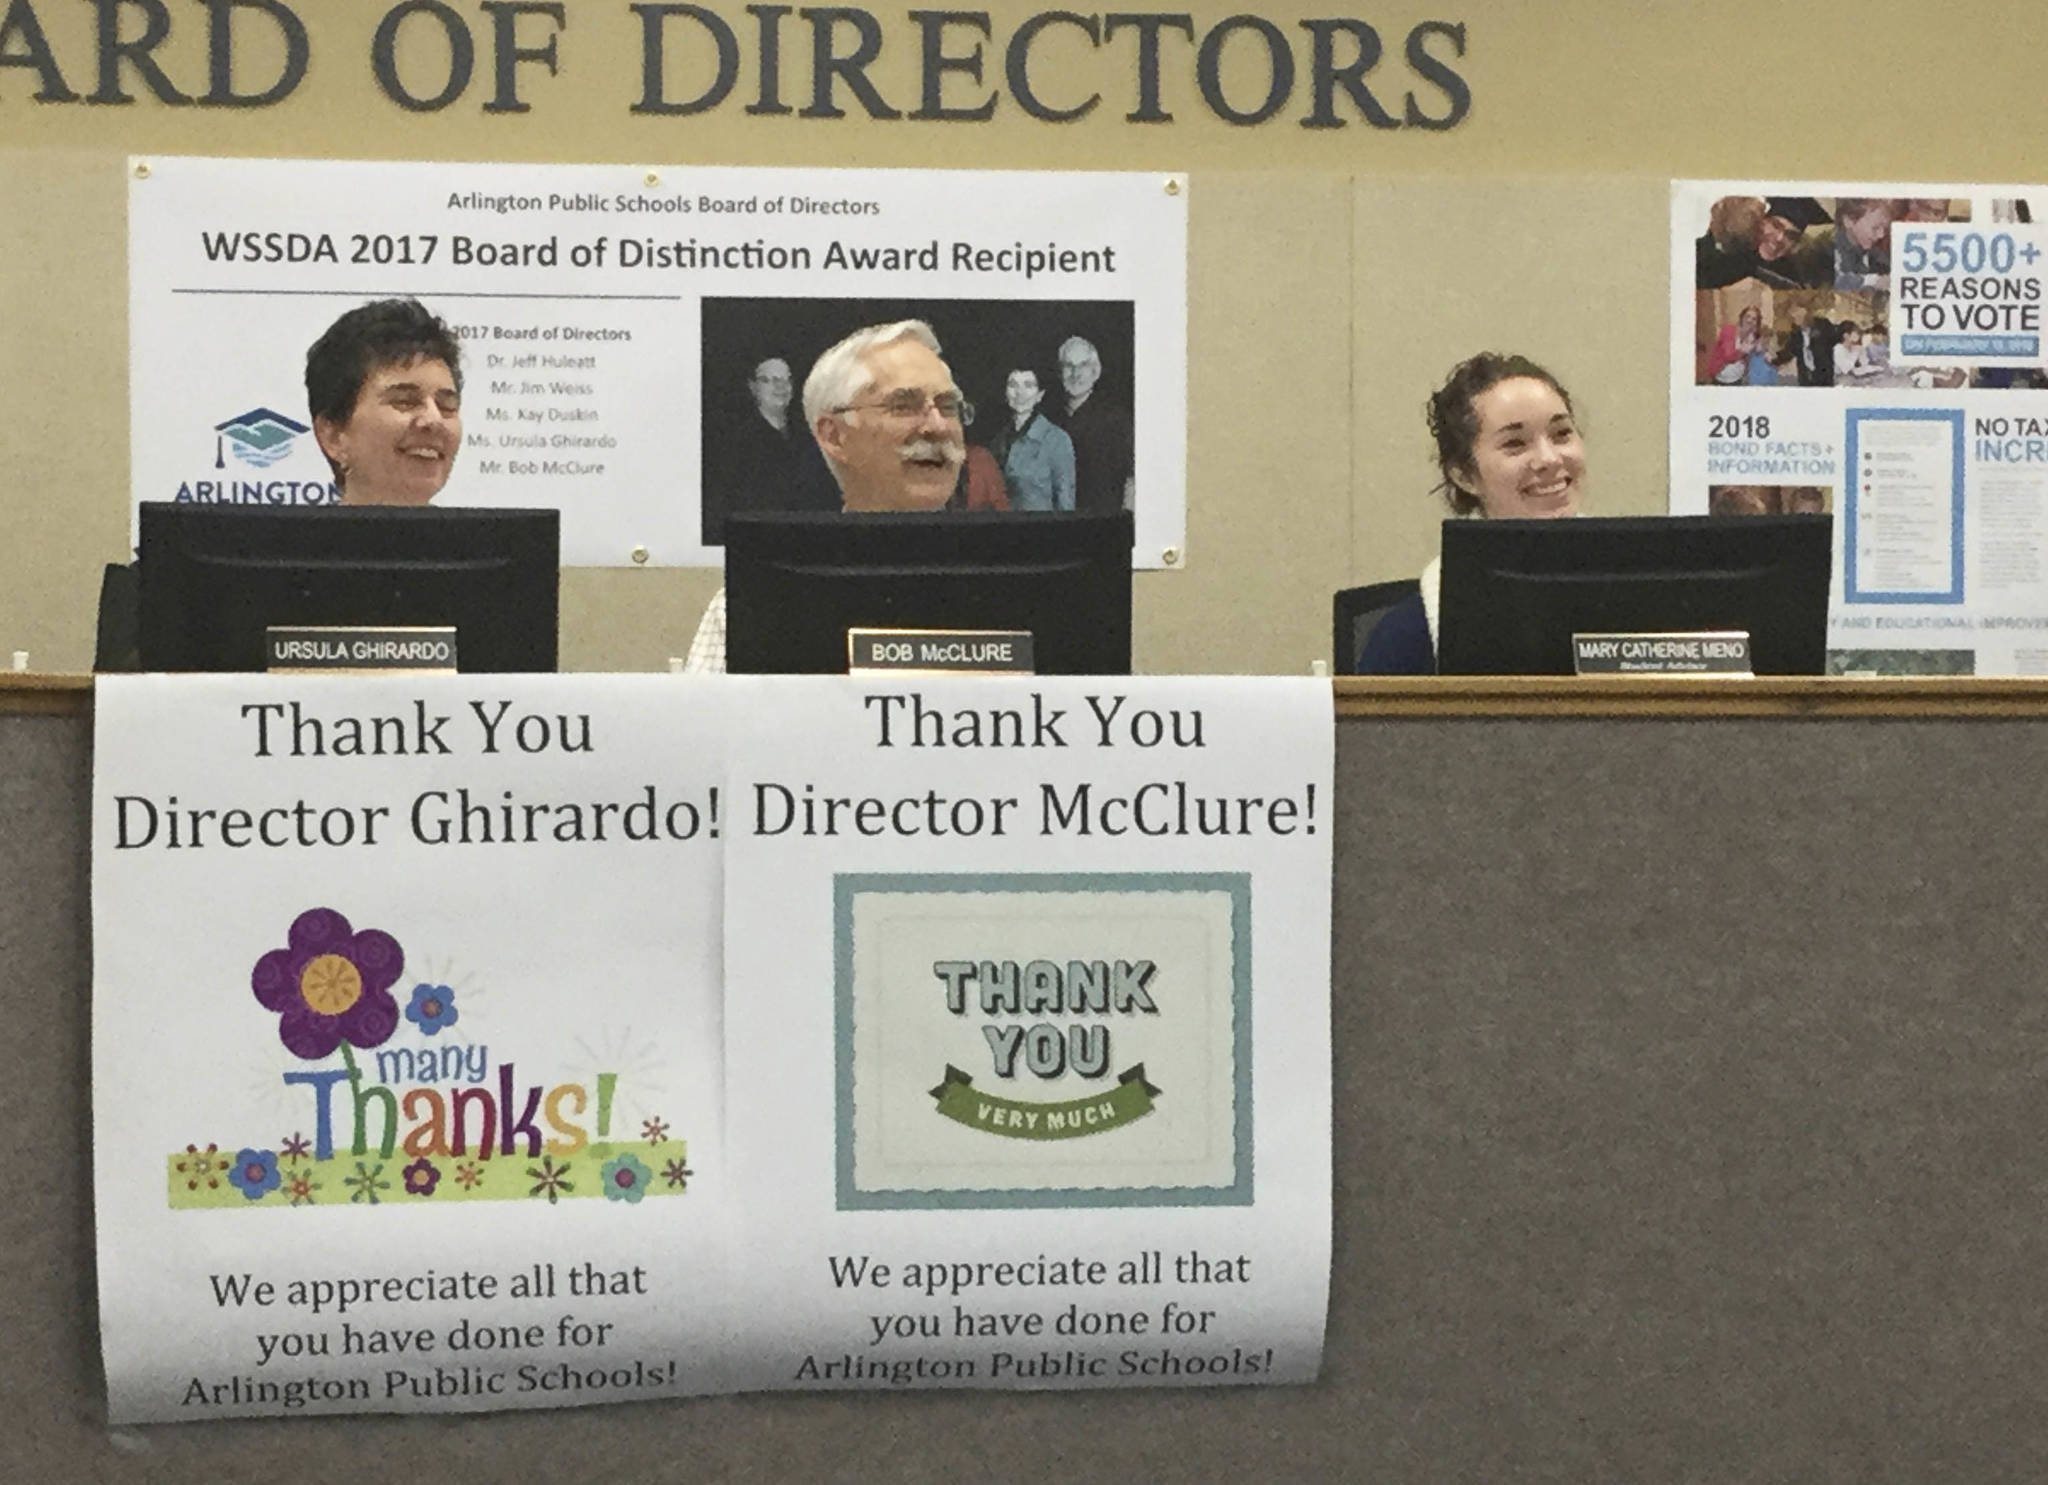 Outgoing longtime school board directors honored with sweet, poetic praise